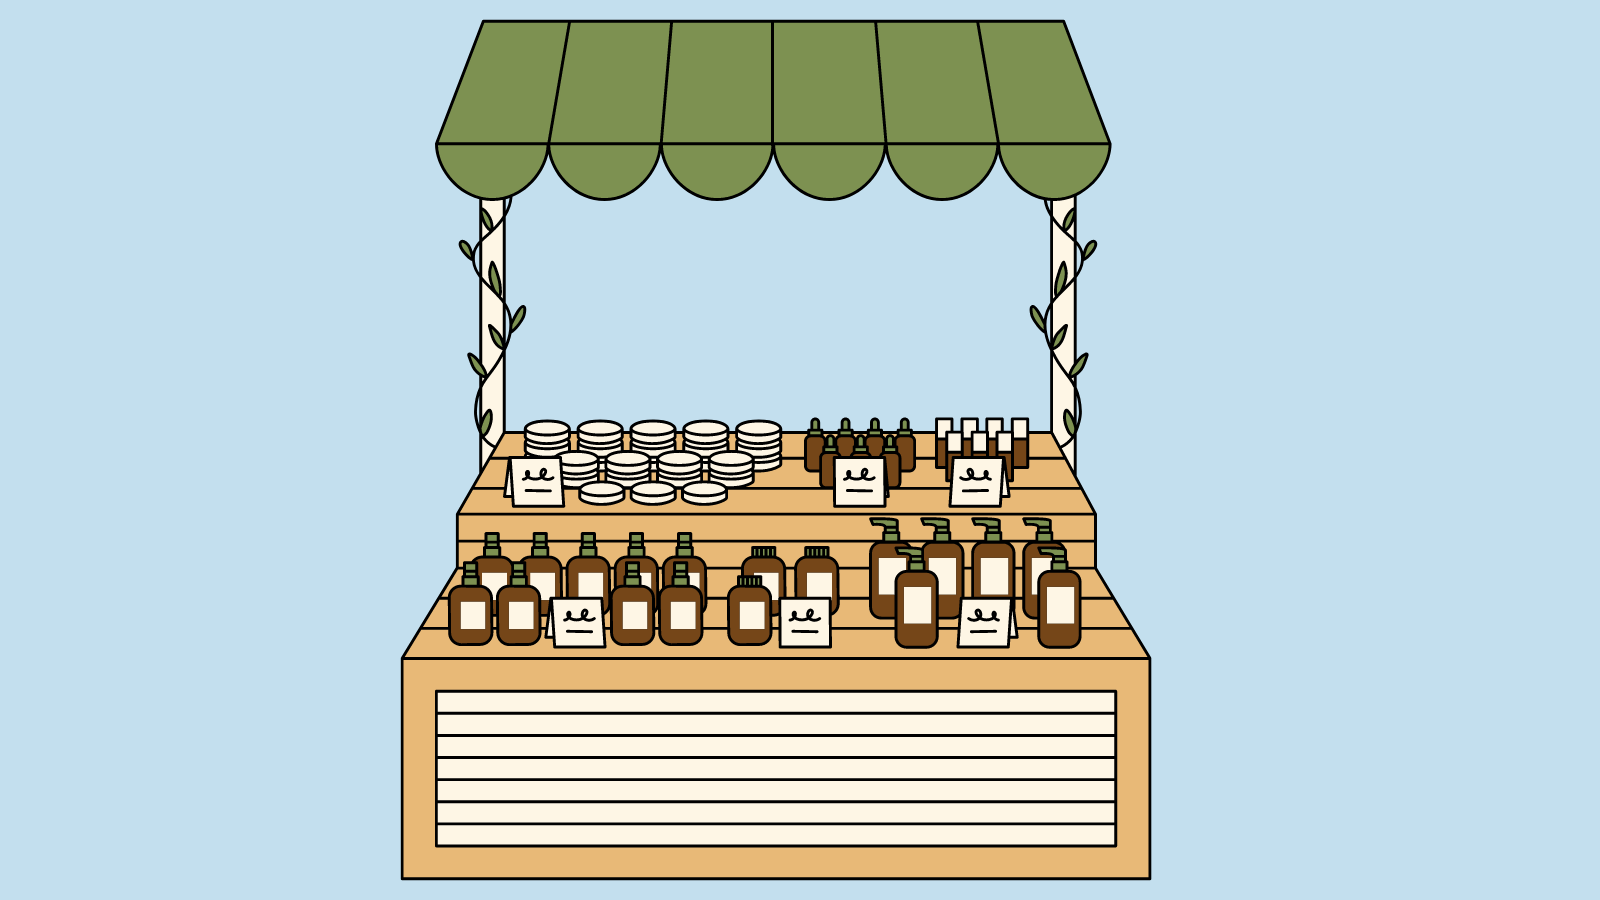 A booth selling various lotions and soaps